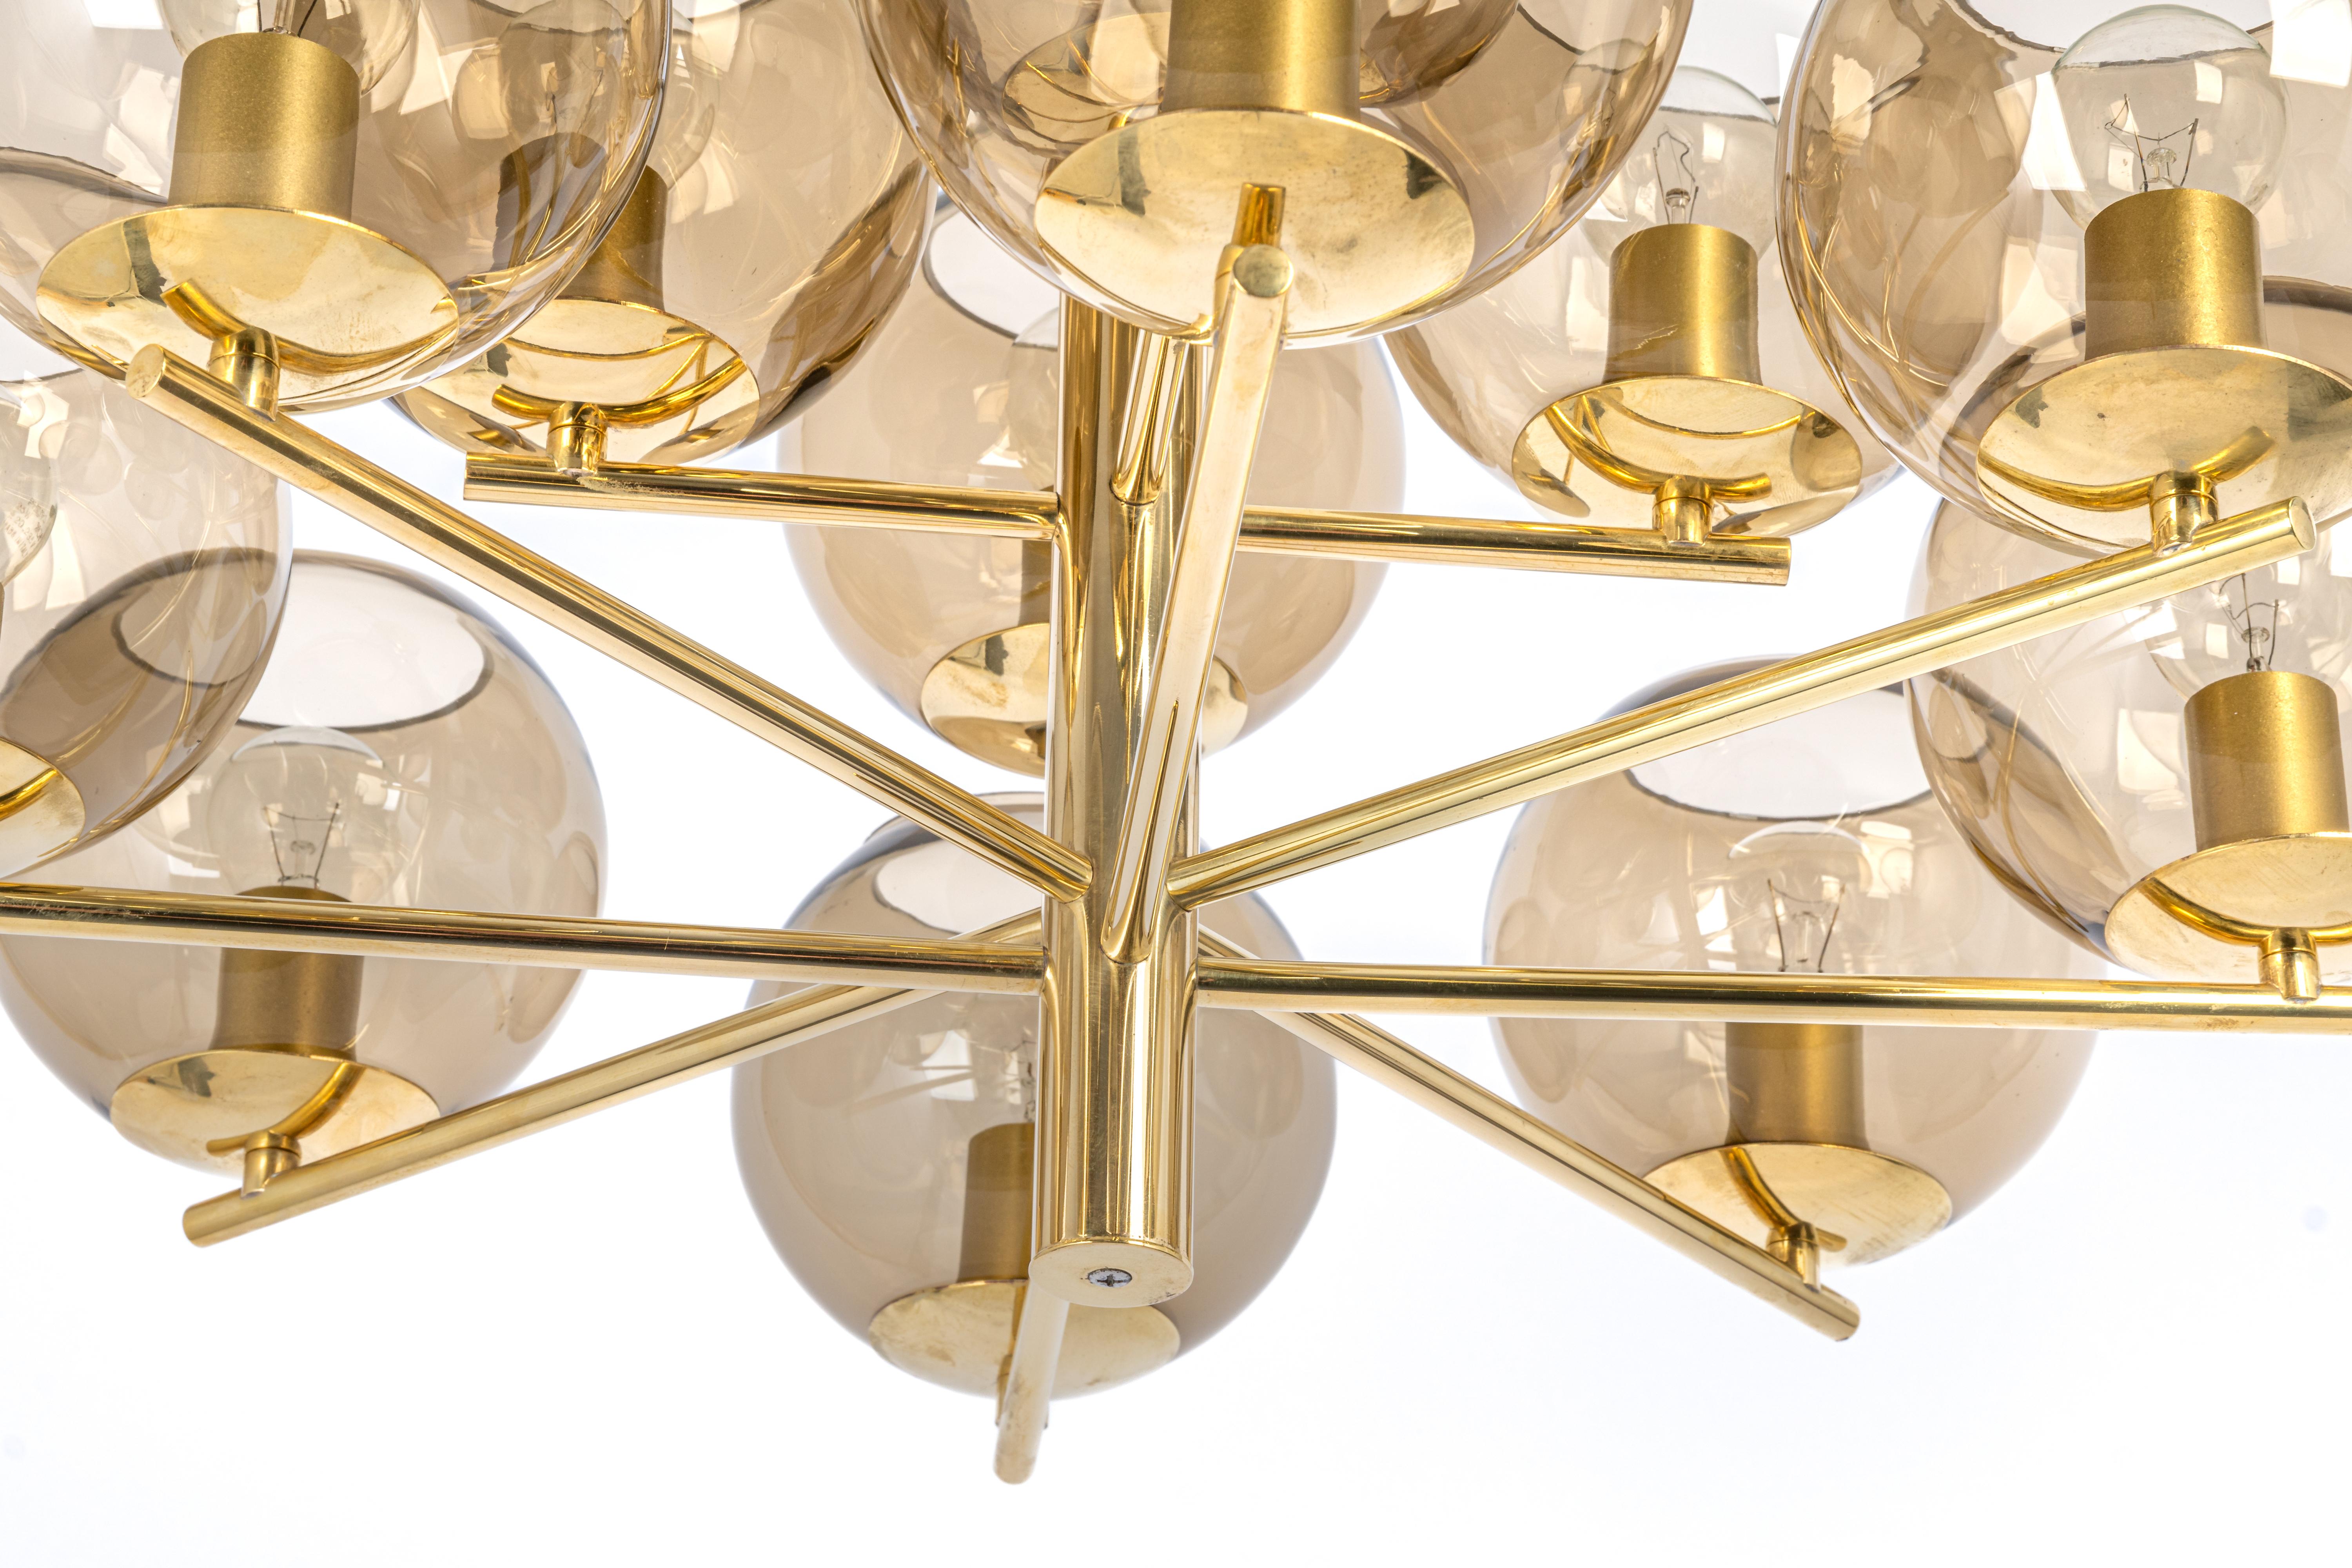 12-light brass chandelier in the style of Sciolari.
Smoked glass in a very beautiful smokey brown color.
Made with brass, best of the 1960s.

High quality and in very good condition. Cleaned, well-wired and ready to use. 

The fixture requires